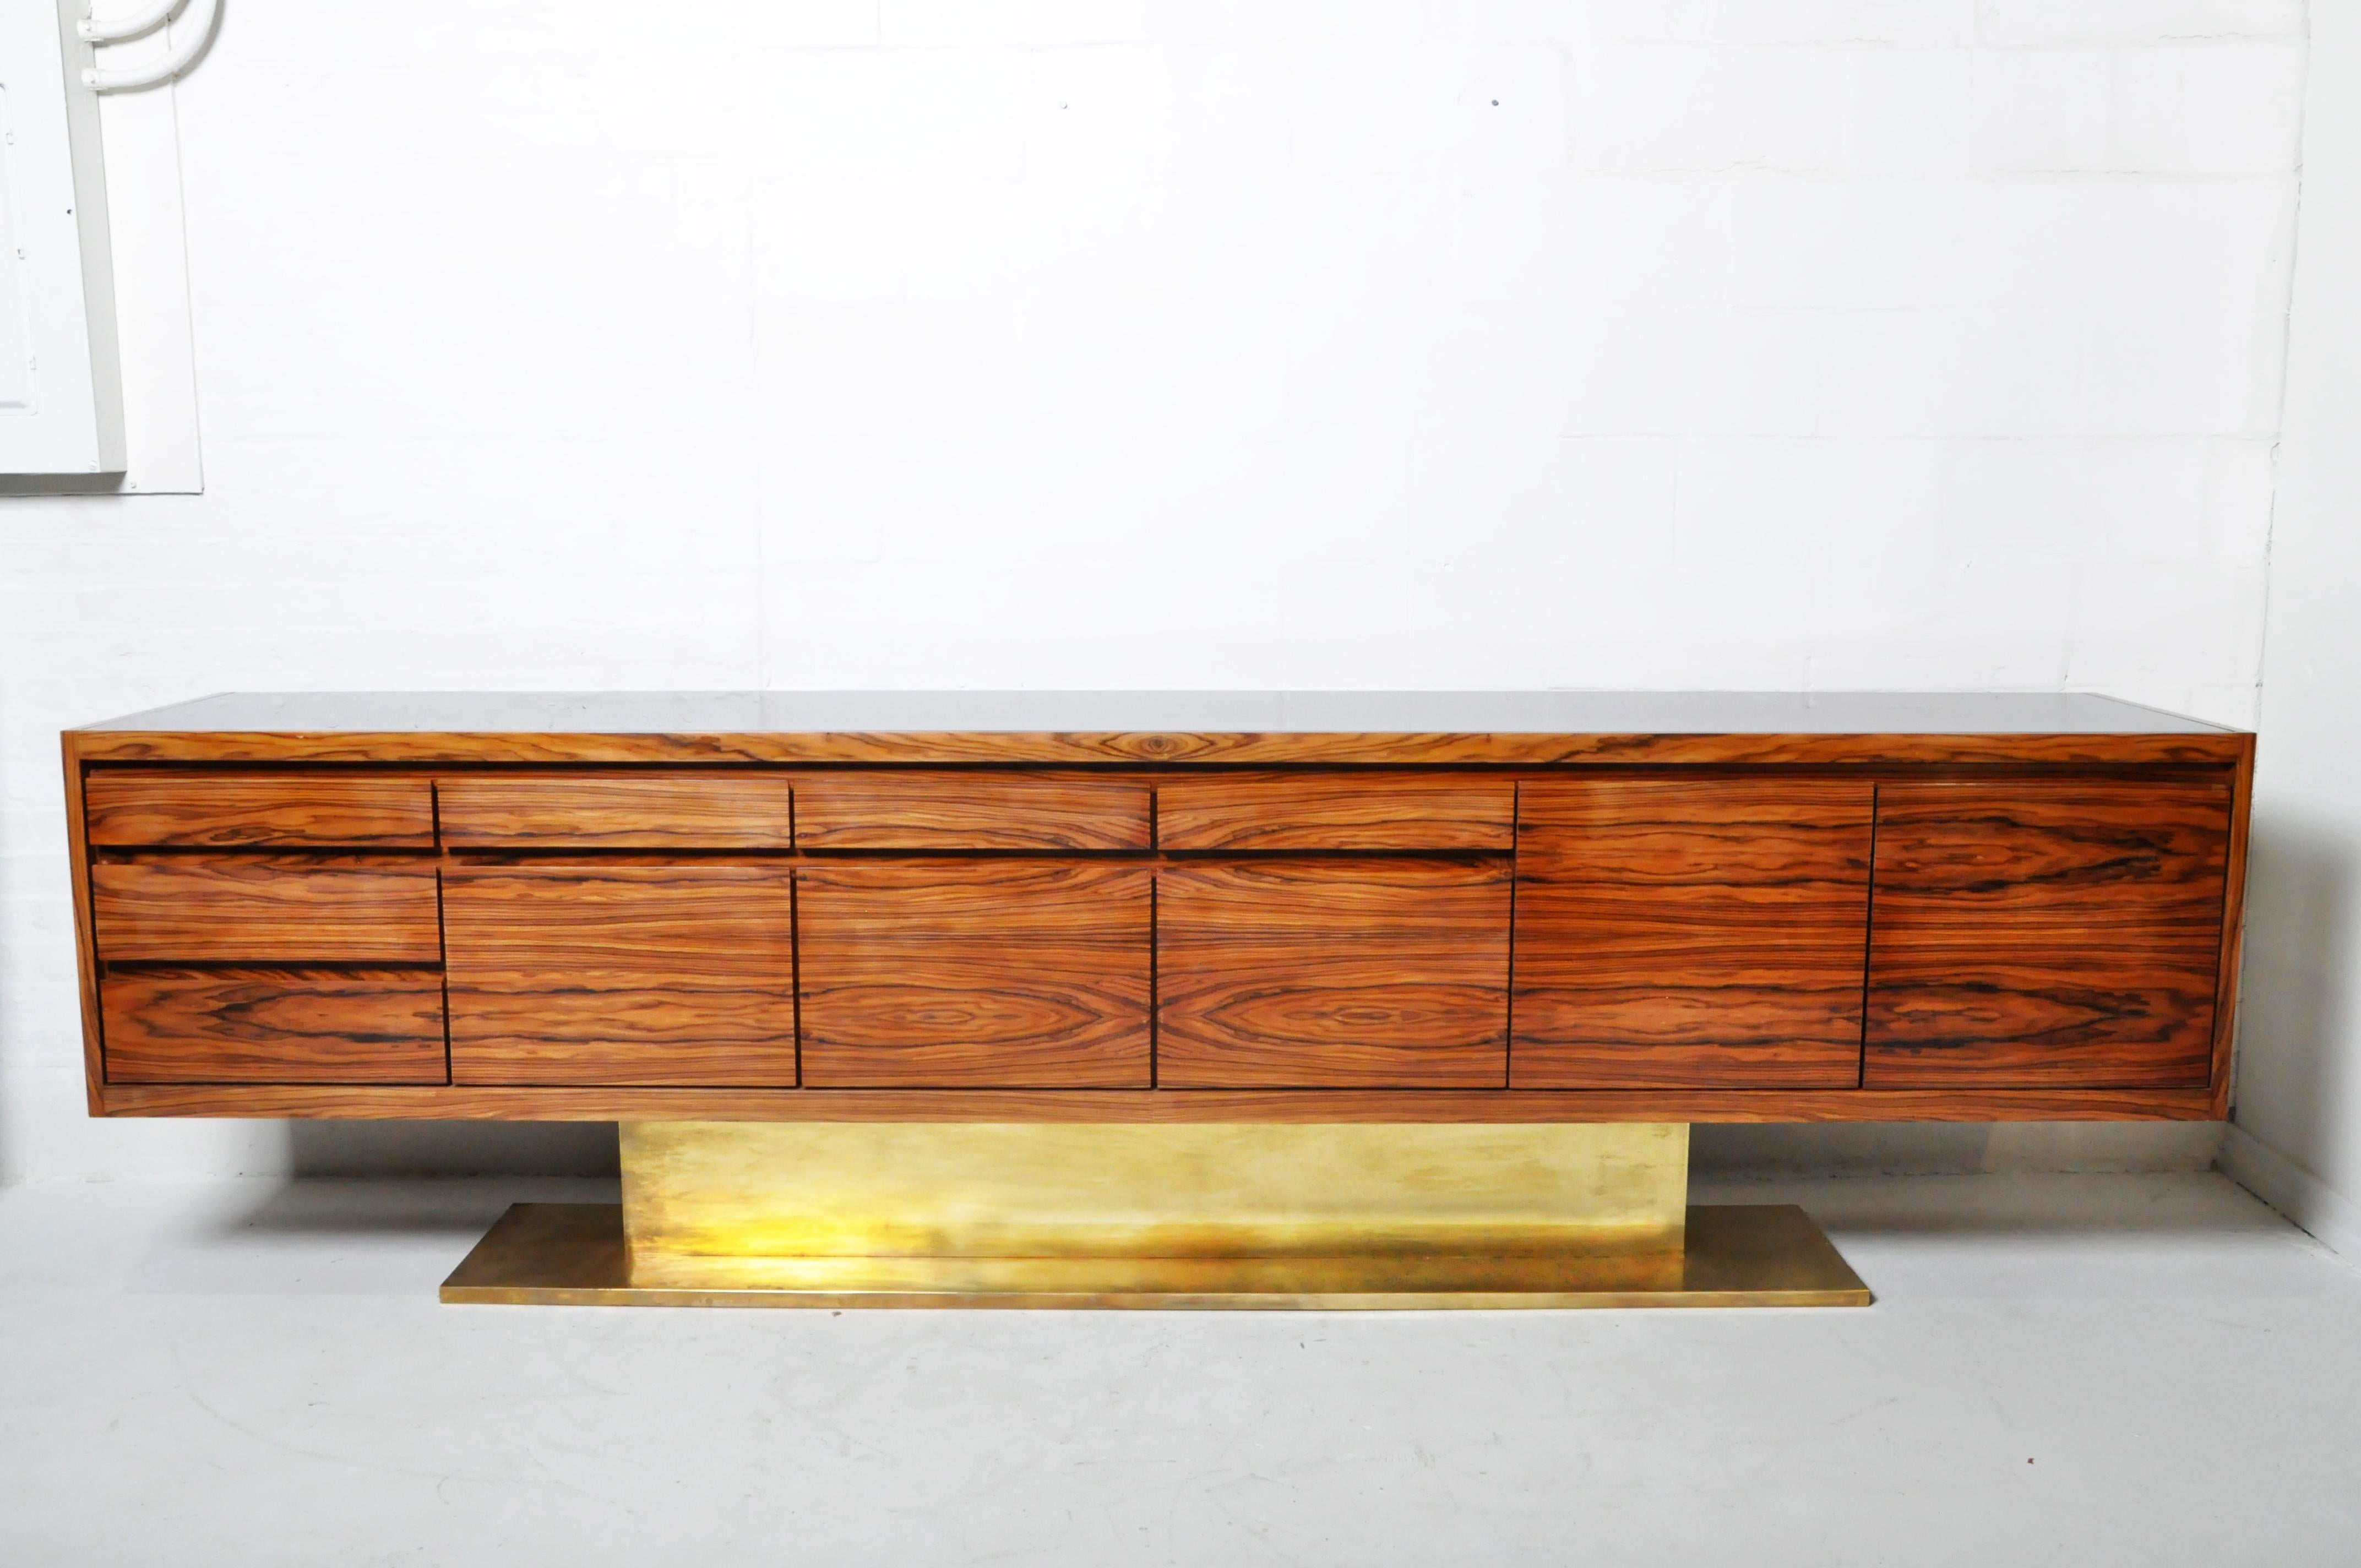 This exceptionally long and sleek console is made from walnut veneers, has a brass base and black glass top. It is a Hungarian-made recreation of a vintage French mid-century modern sideboard design. Special attention has been given to the selection